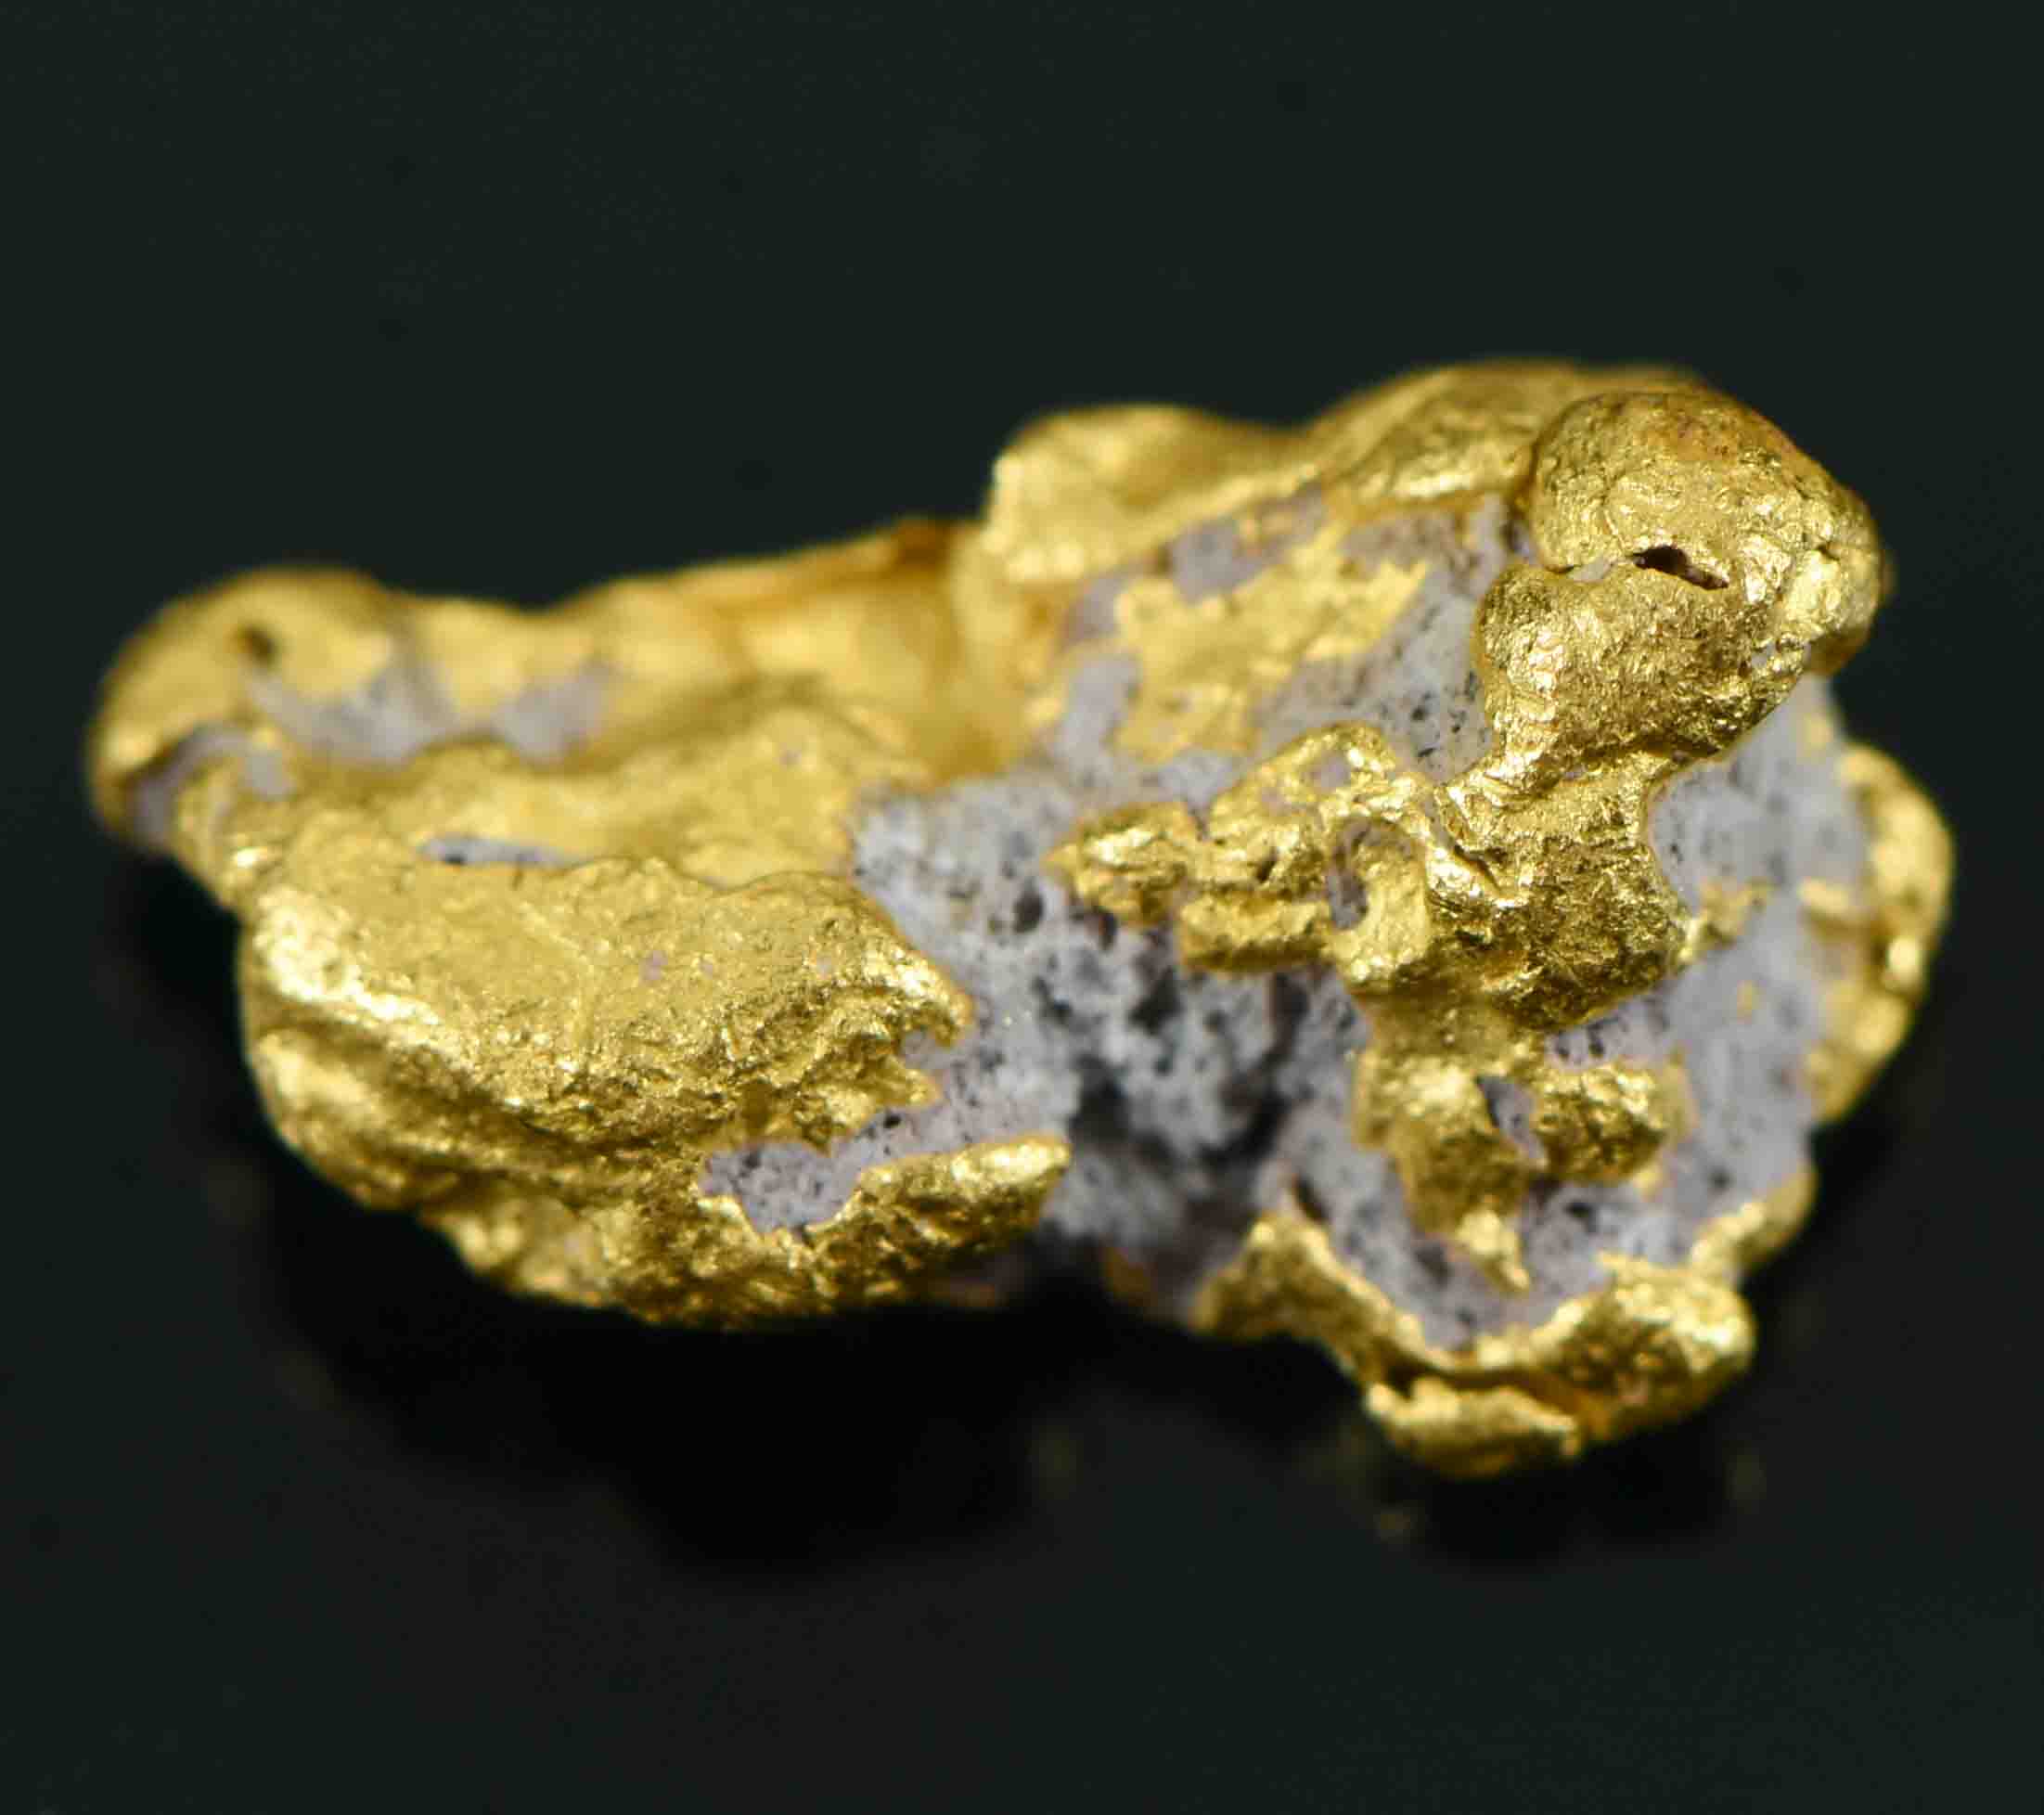 #19 Australian Natural Gold Nugget With Quartz Weighs 1.17 Grams.